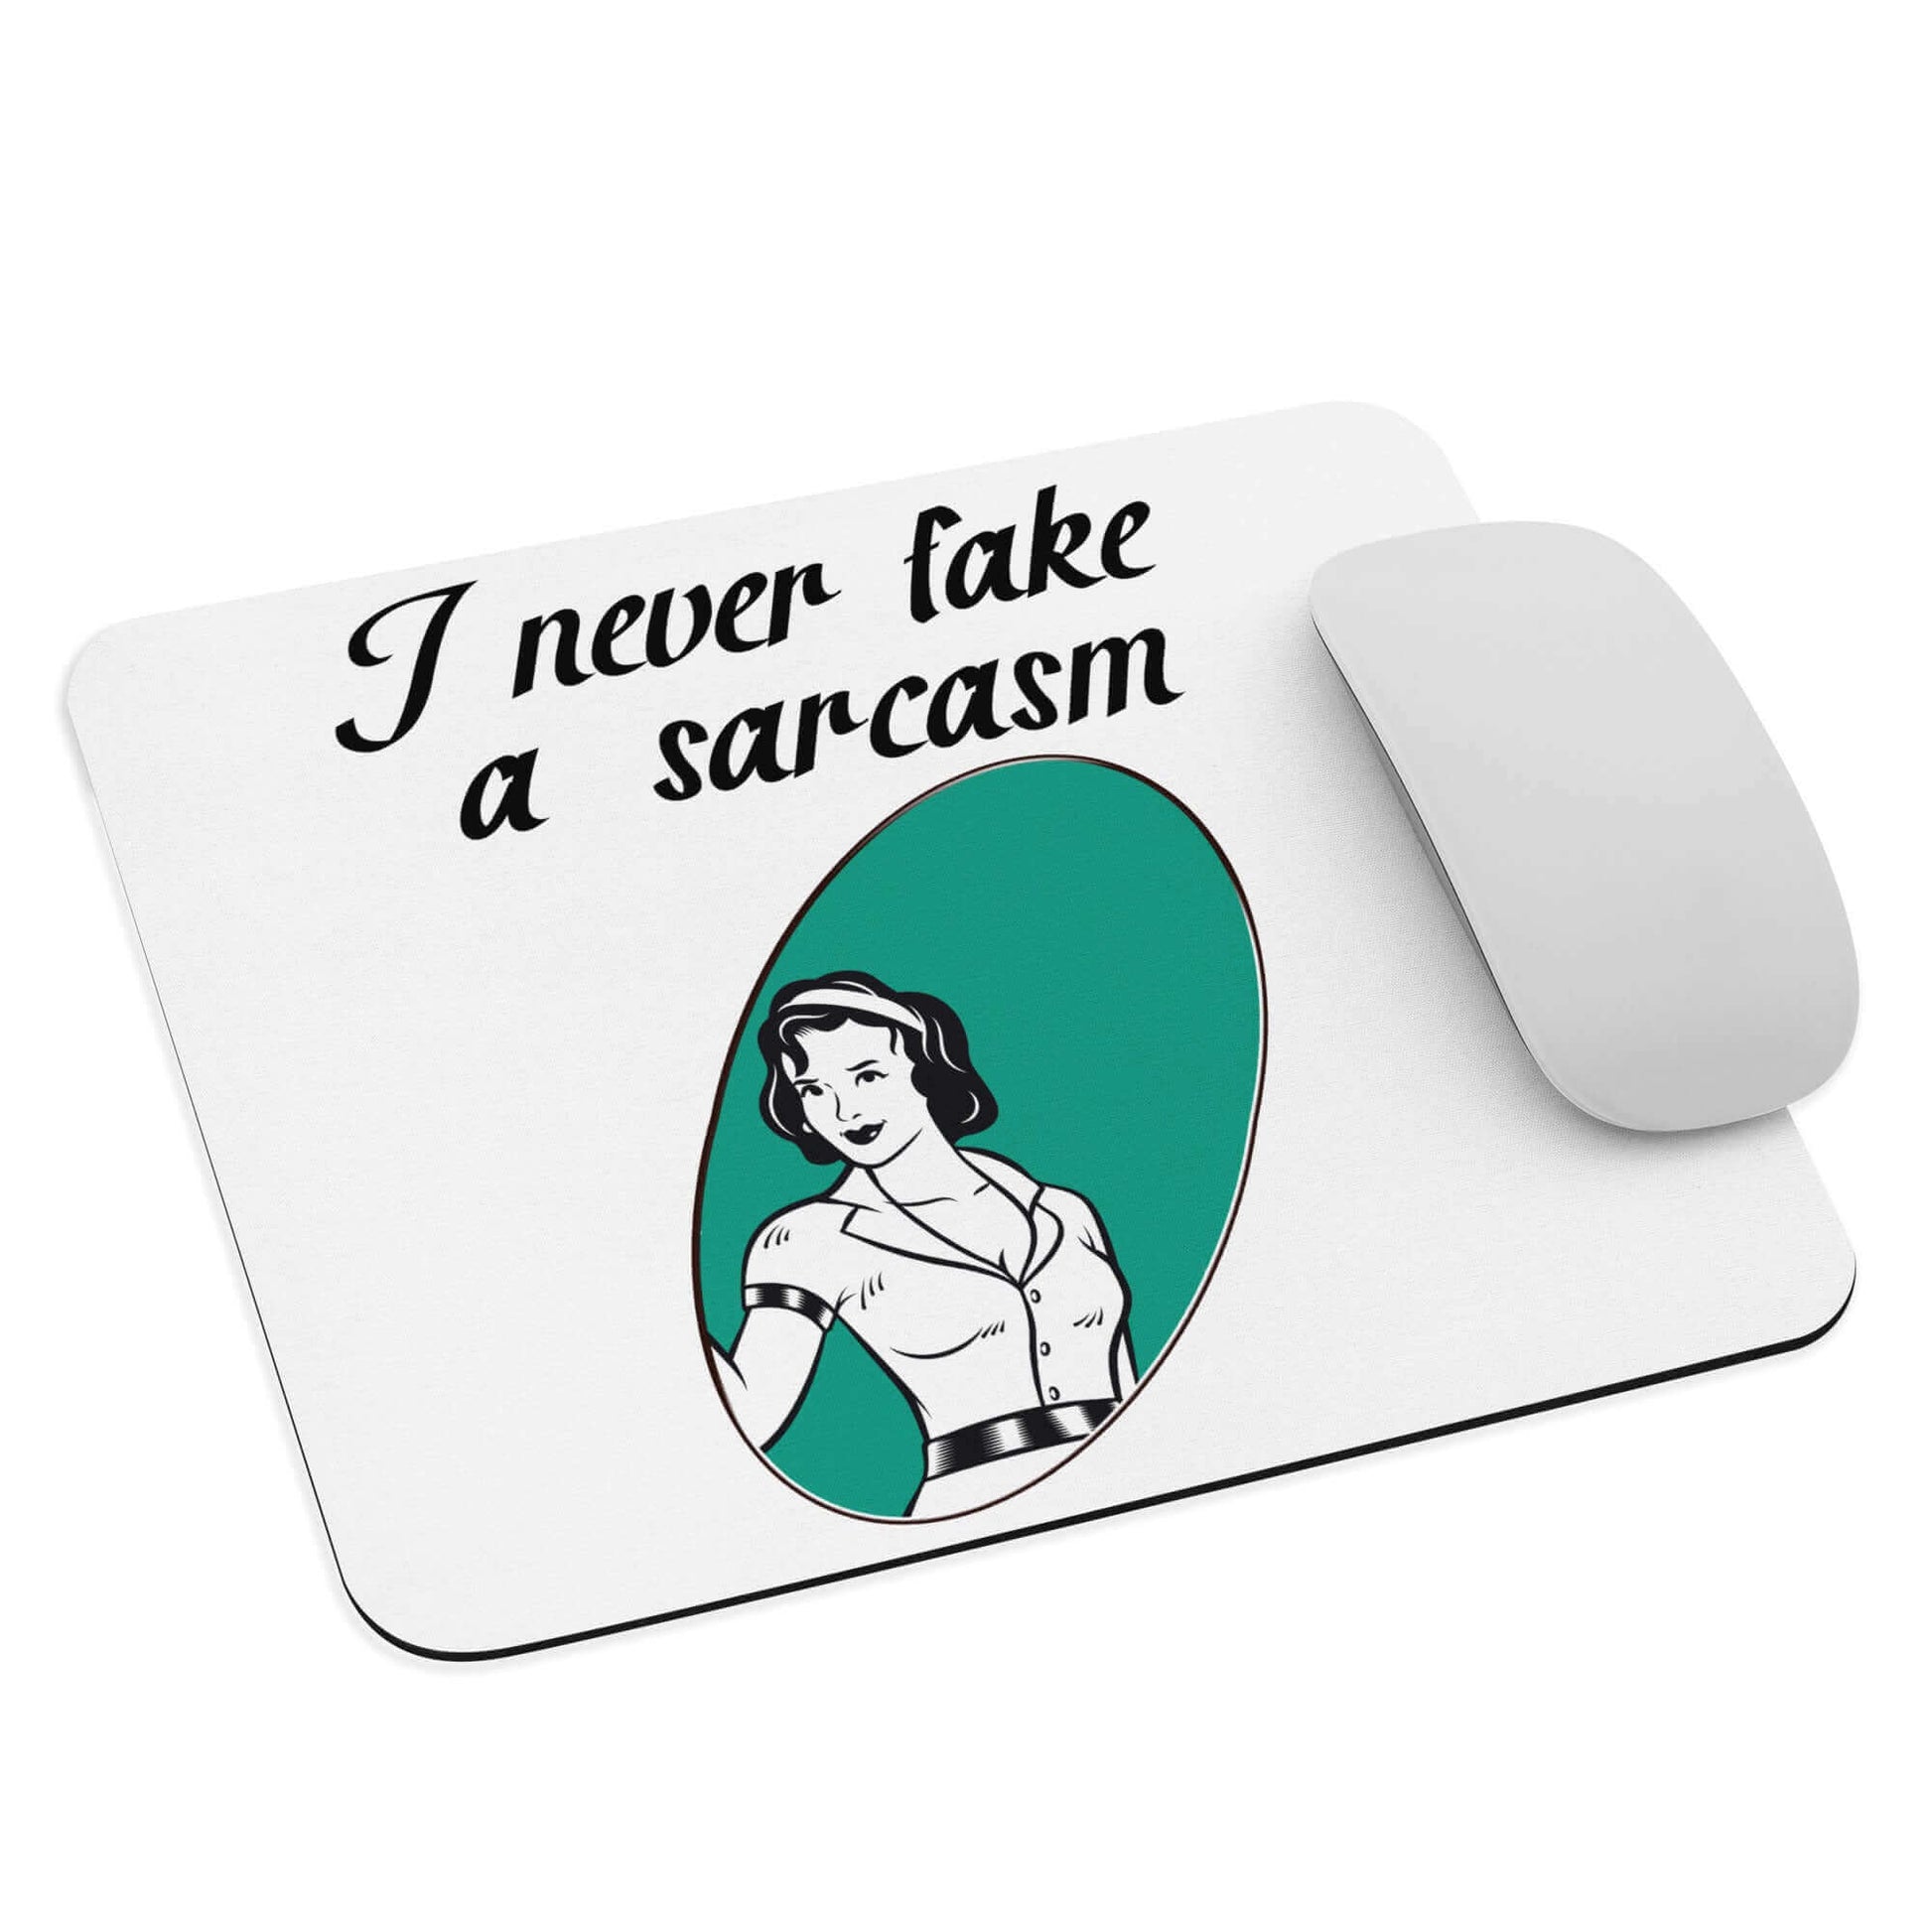 I NEVER fake a sarcasm - Mouse pad - Horrible Designs